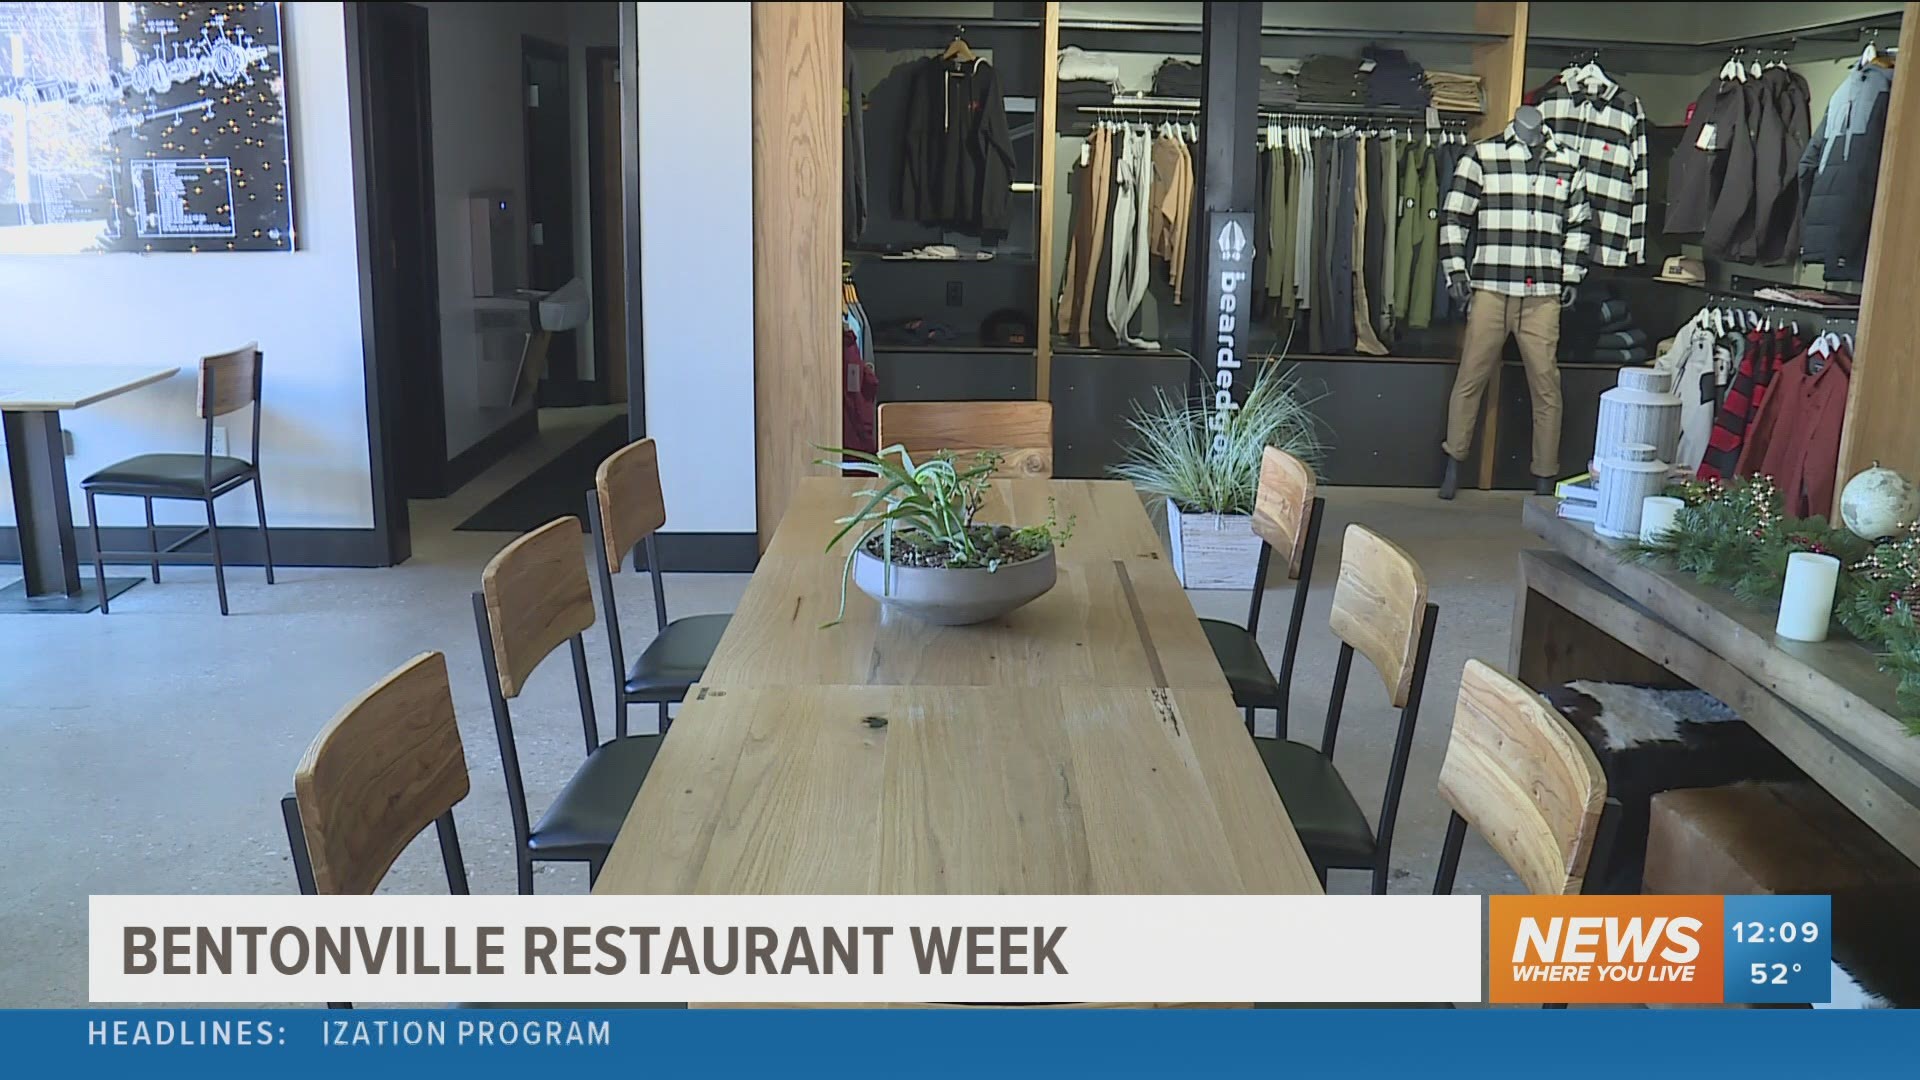 The City of Bentonville started Restaurant Week in hopes of promoting local businesses during the pandemic.